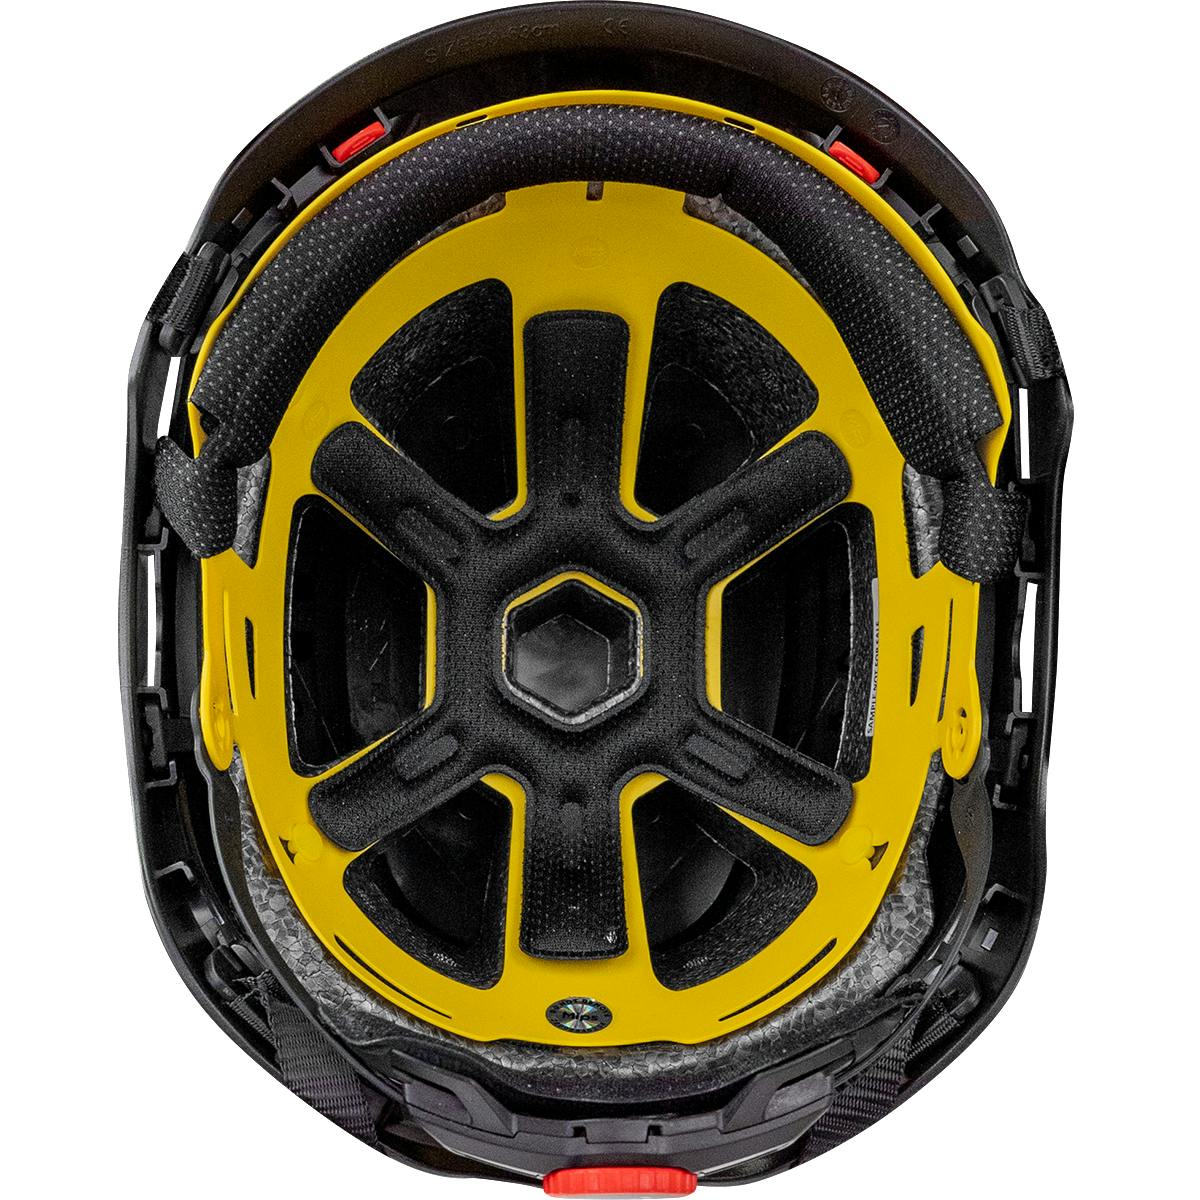 Traverse™ Industrial Climbing Helmet with Mips® Technology, ABS Shell, EPS Foam Impact Liner, HDPE Suspension, Wheel Ratchet Adjustment and 4-Point Chin Strap (280-HP1491RM)_1